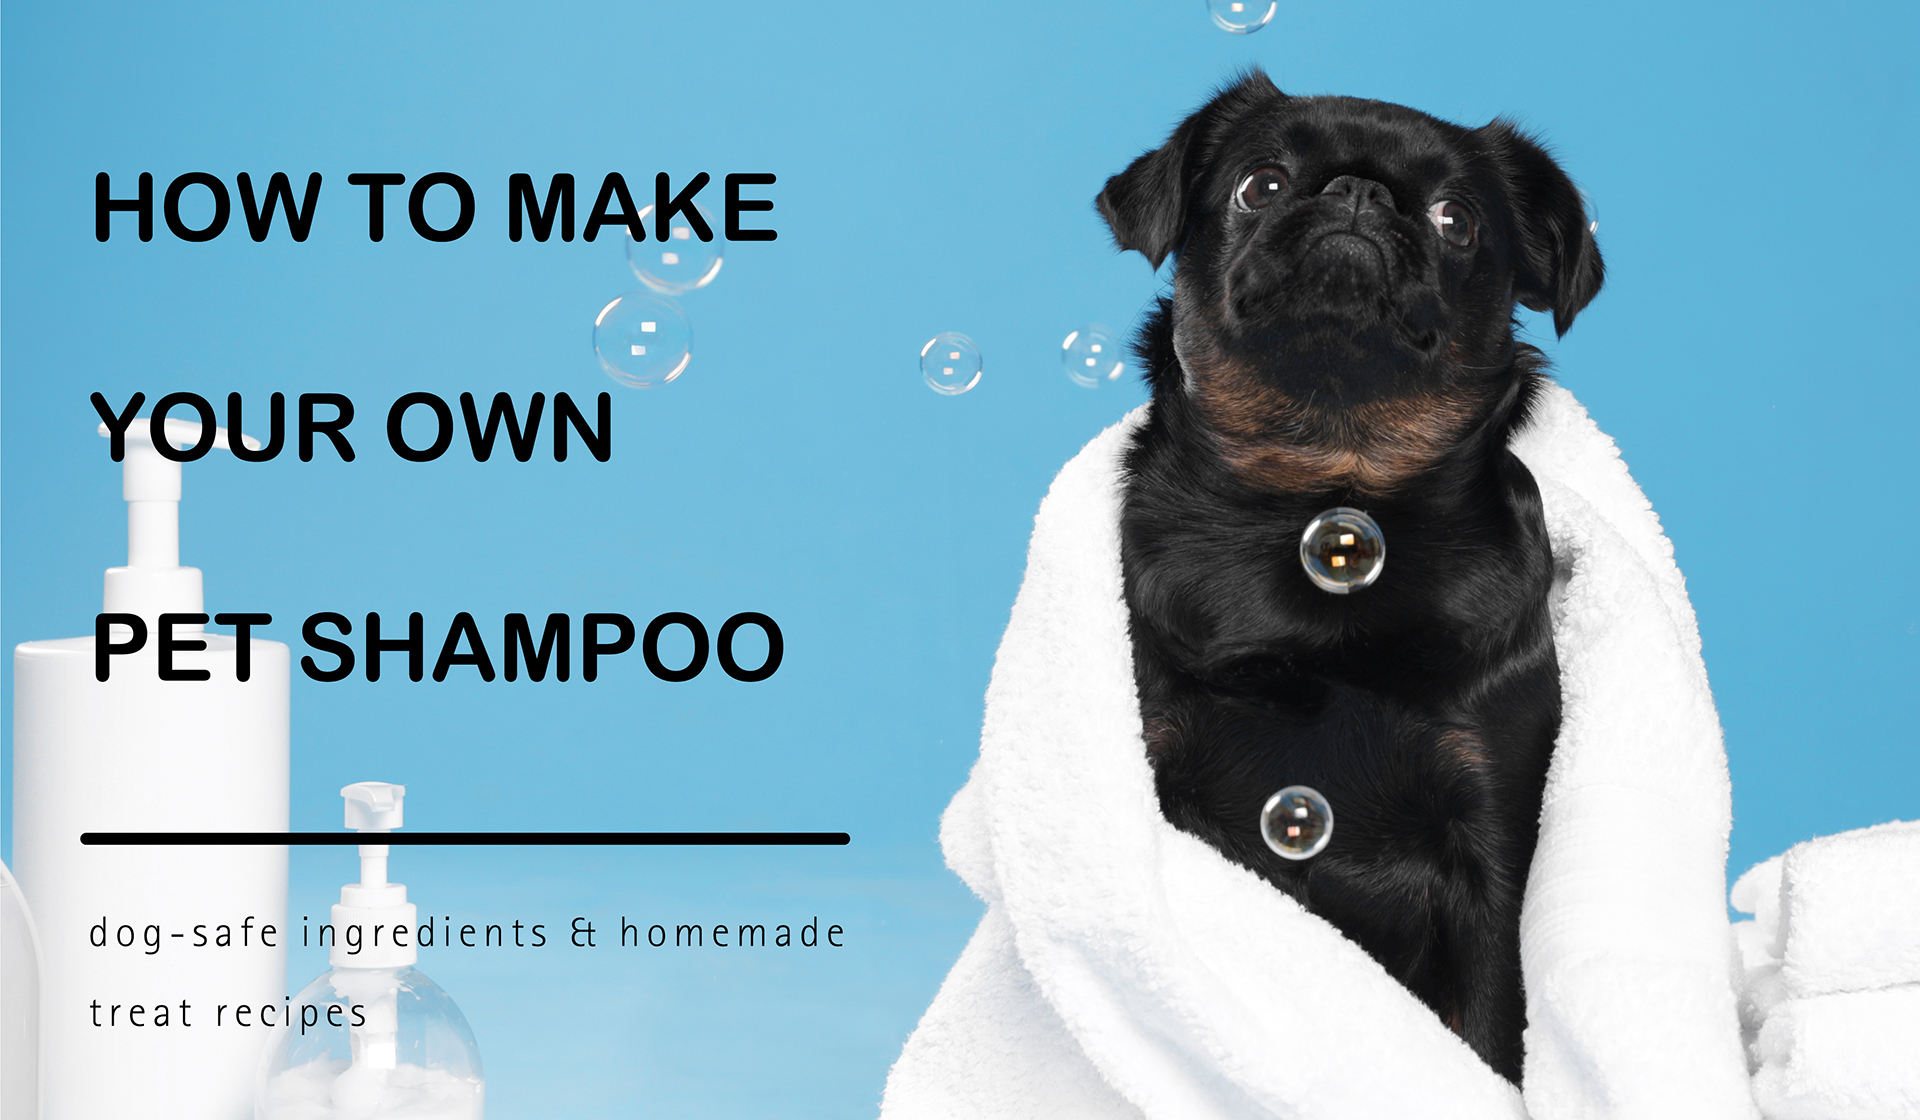 How To Make Your Own Pet Shampoo